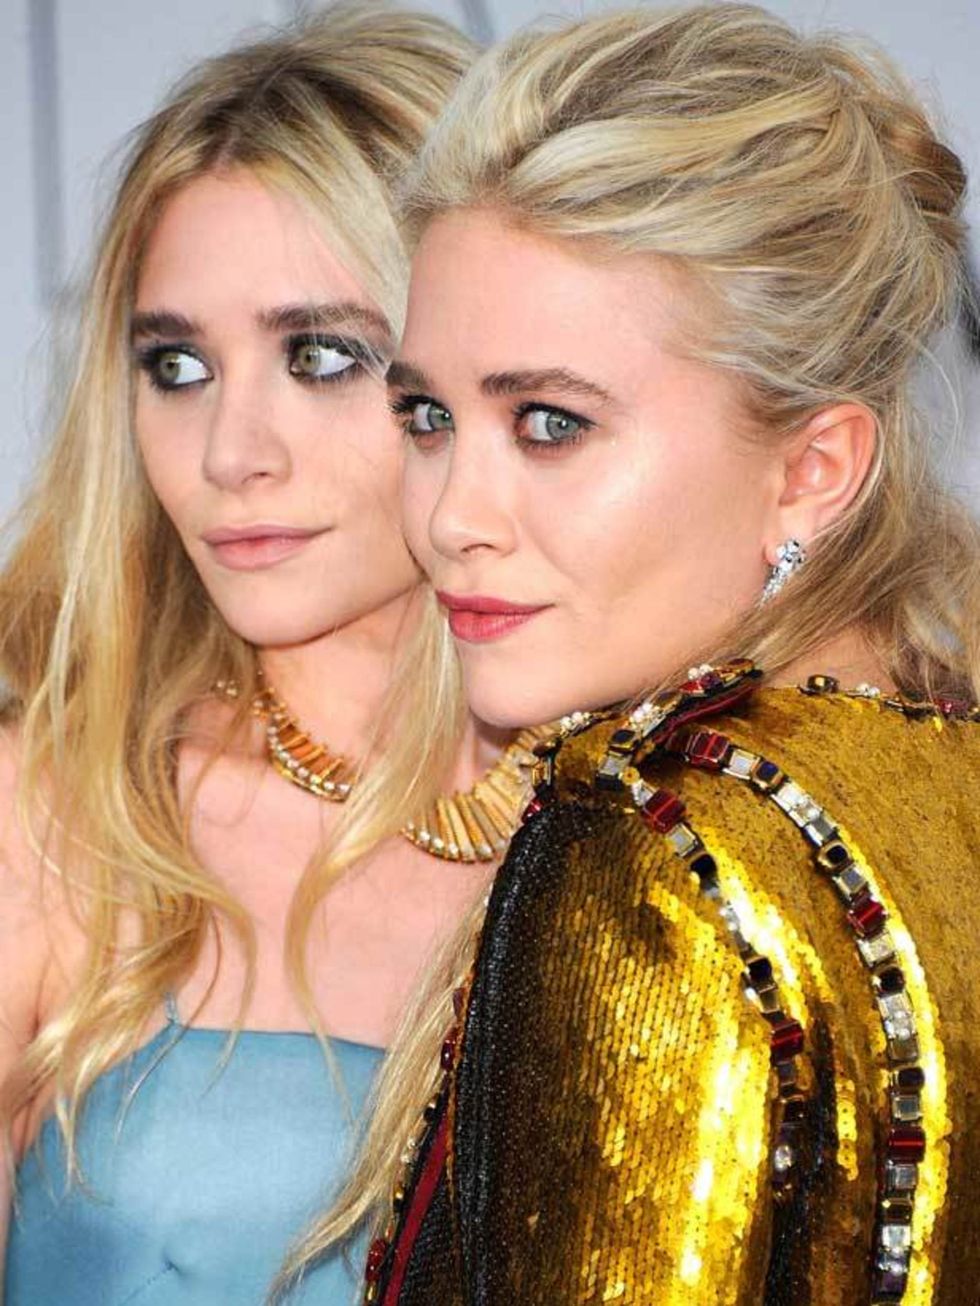 <p>See <a href="http://www.elleuk.com/starstyle/style-files/(section)/mary-kate-olsen">Mary-Kate</a> and <a href="http://www.elleuk.com/starstyle/style-files/(section)/ashley-olsen">Ashley's</a> Style Files</p>